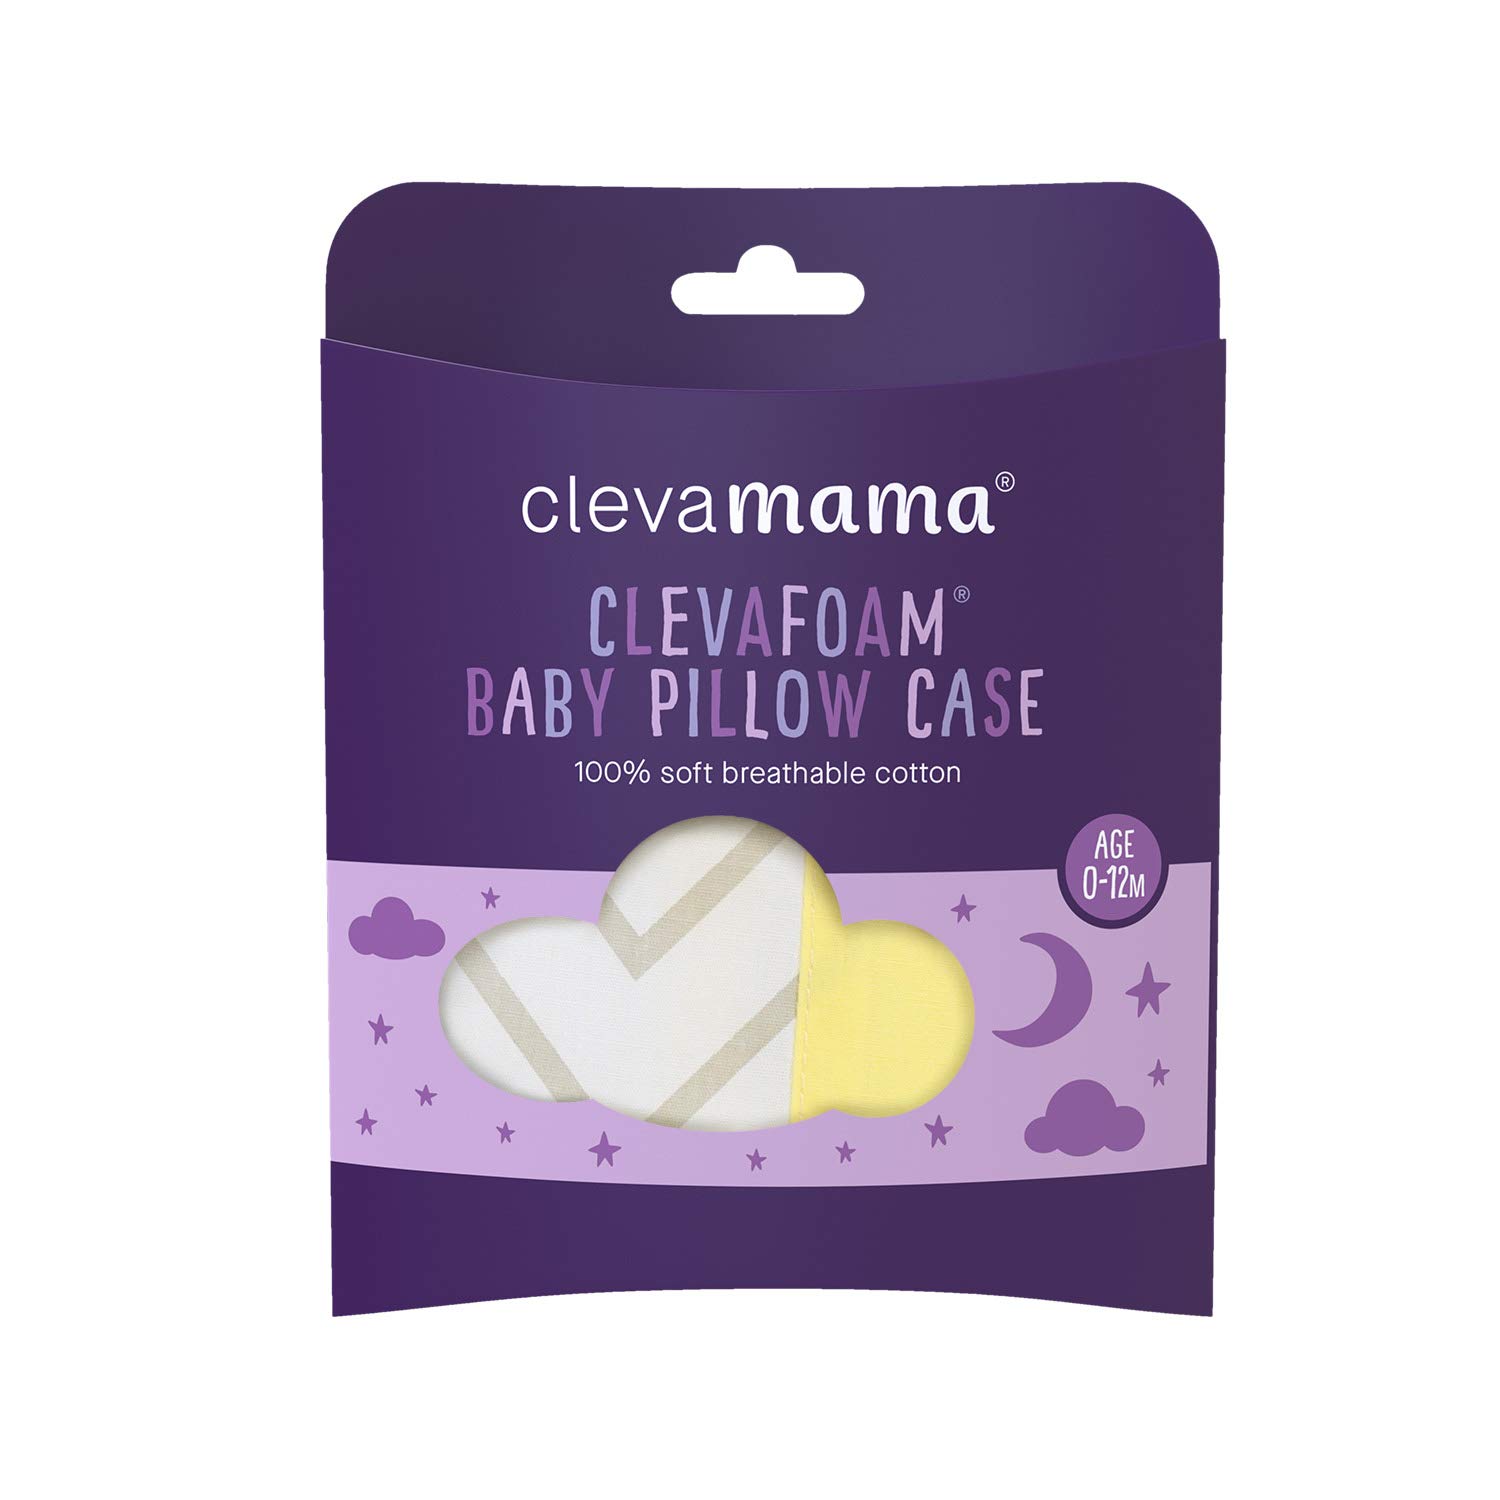 Clevamama Baby Pillow Cushion Covers 100% Cotton Grey